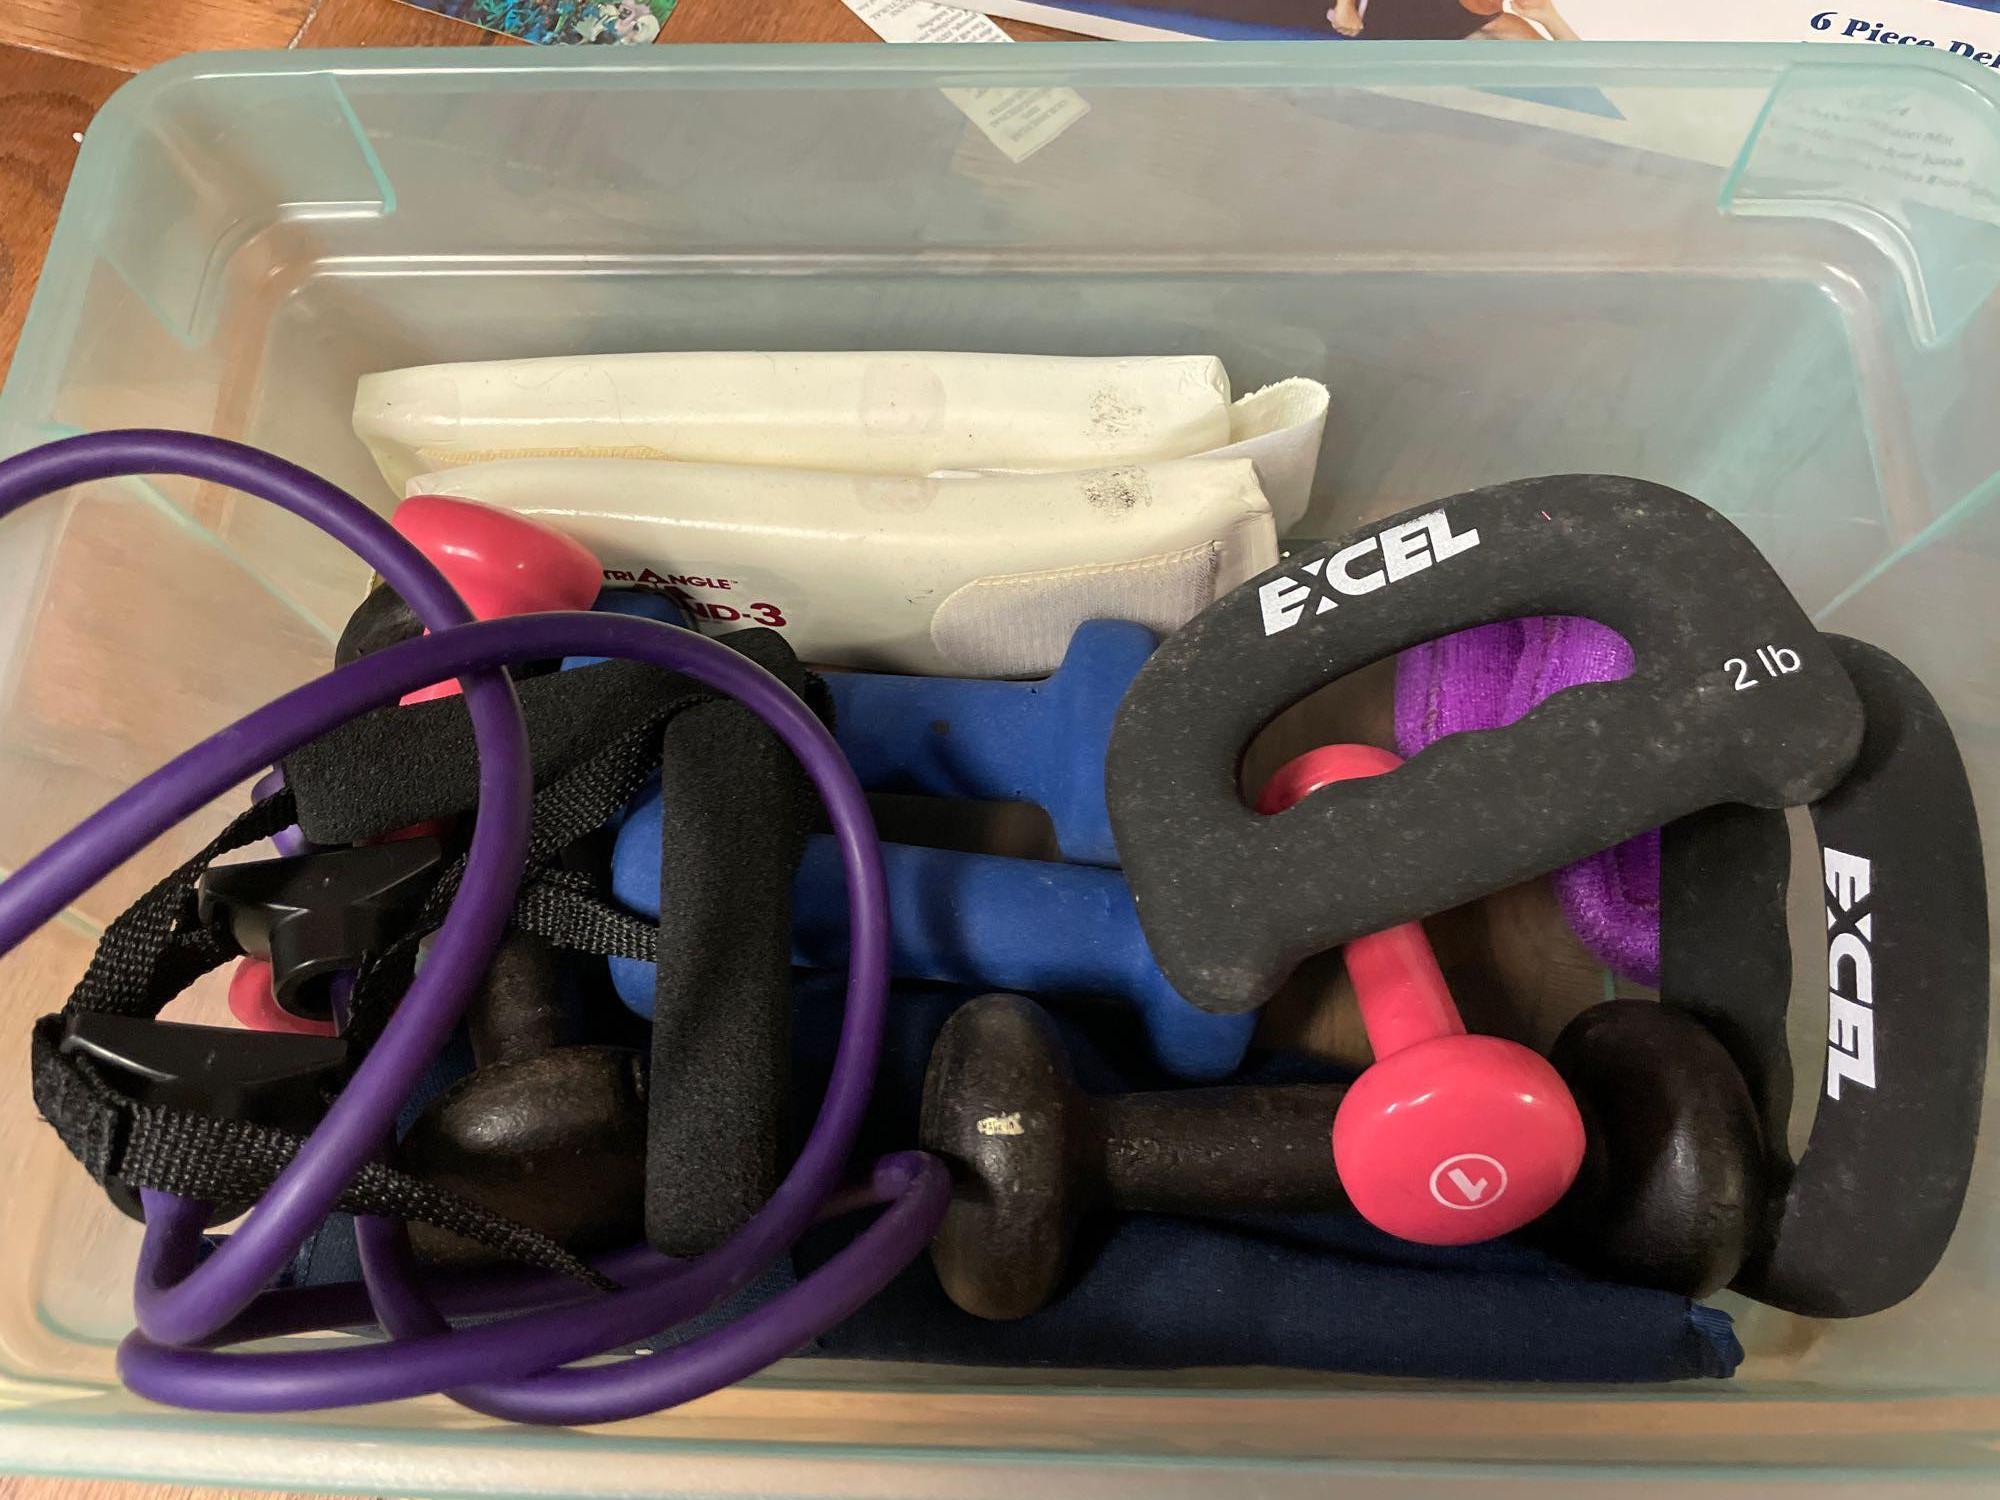 Tote full of exercise weights and straps, Pilates kit